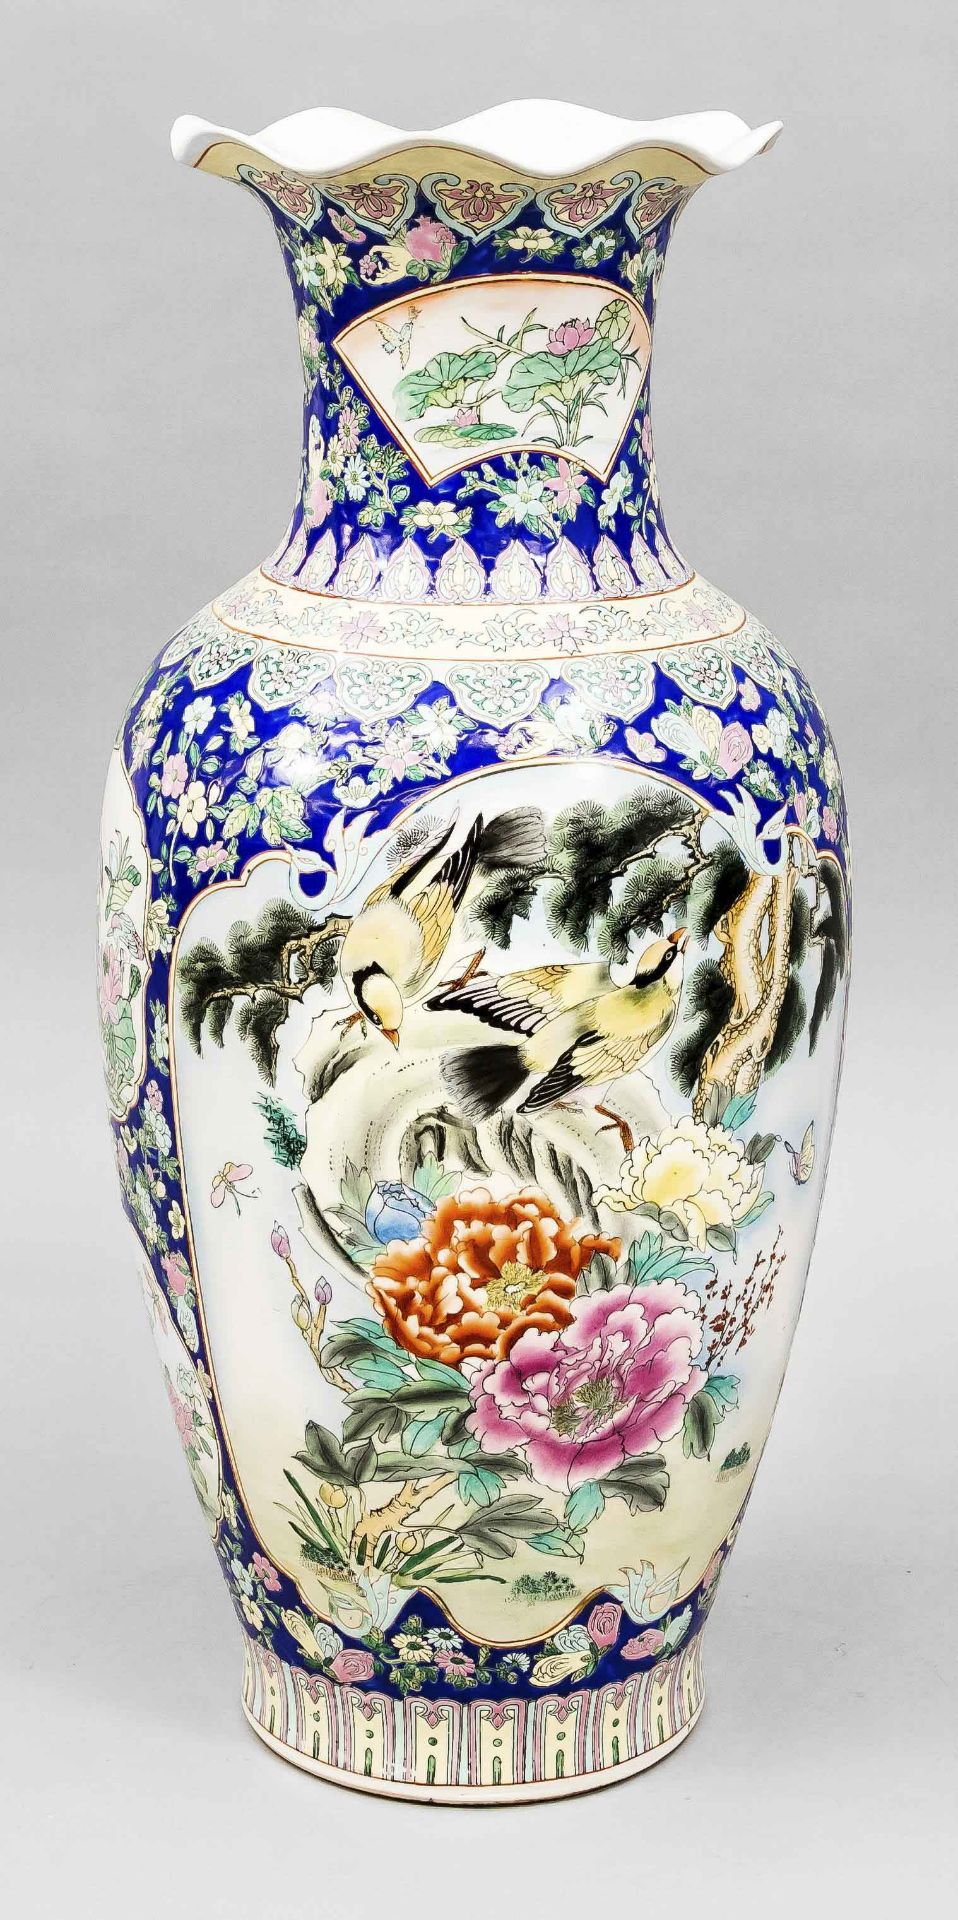 Famille rose floor vase, China, 20th c. Body divided into two large and four smaller cartouches with